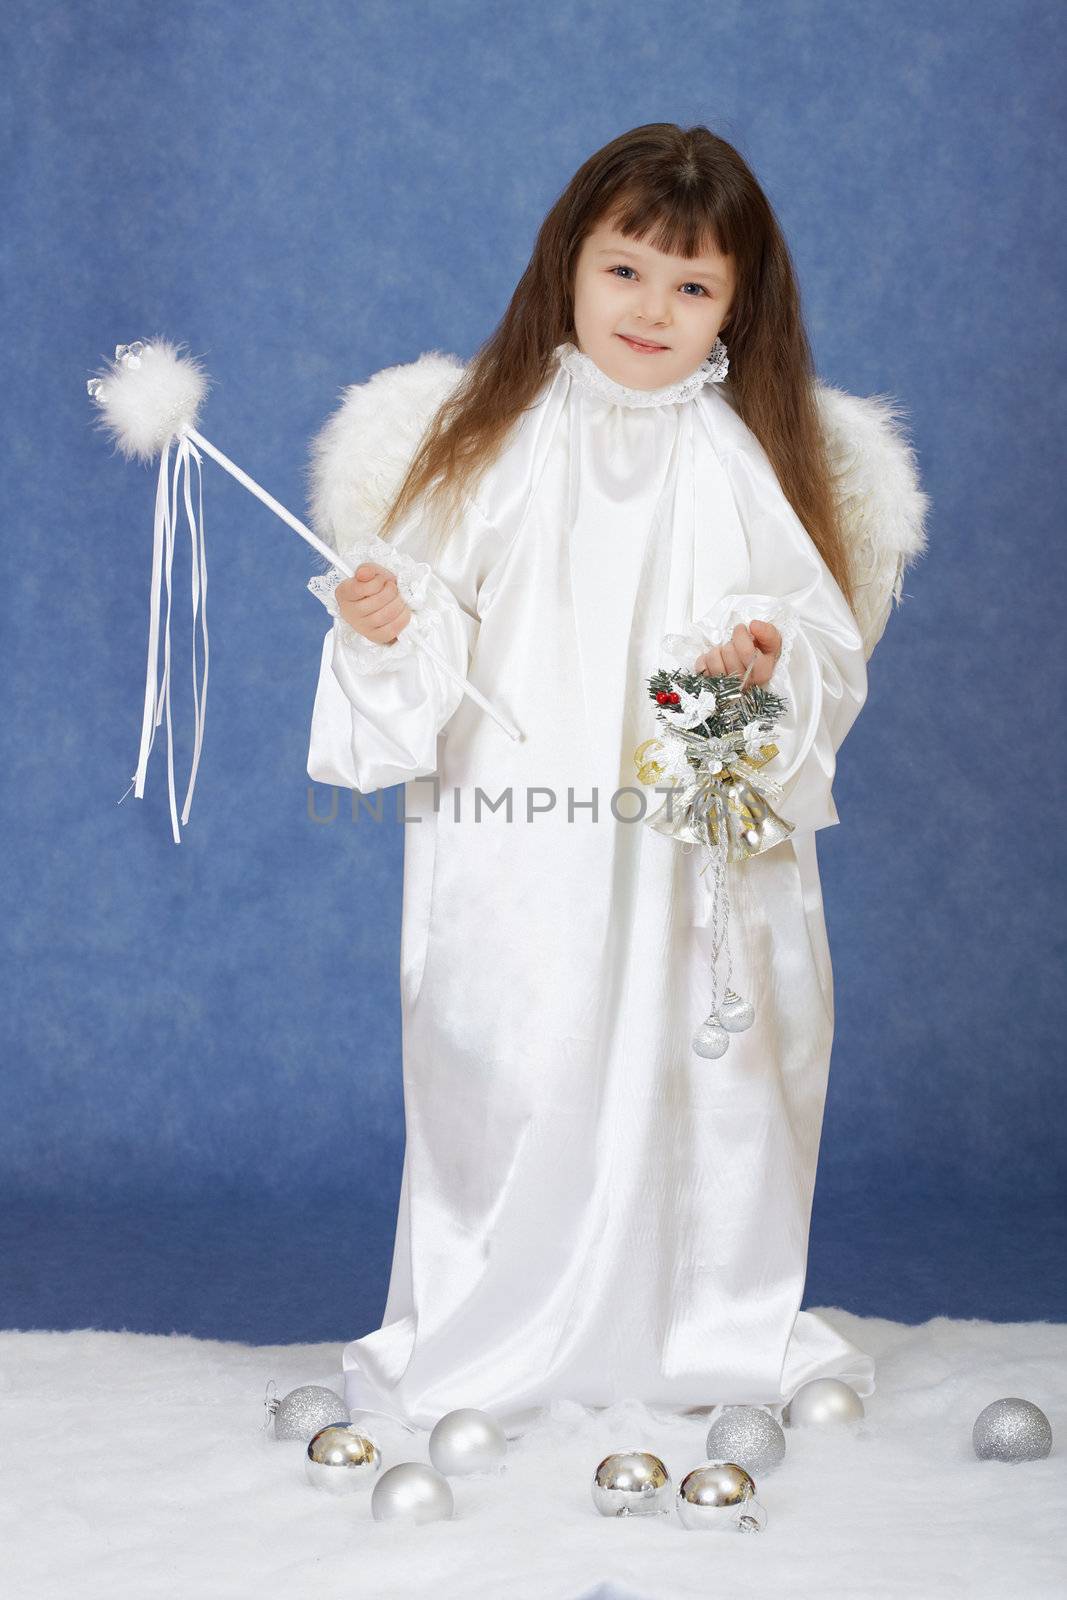 The little girl in a suit of angel on a dark blue background